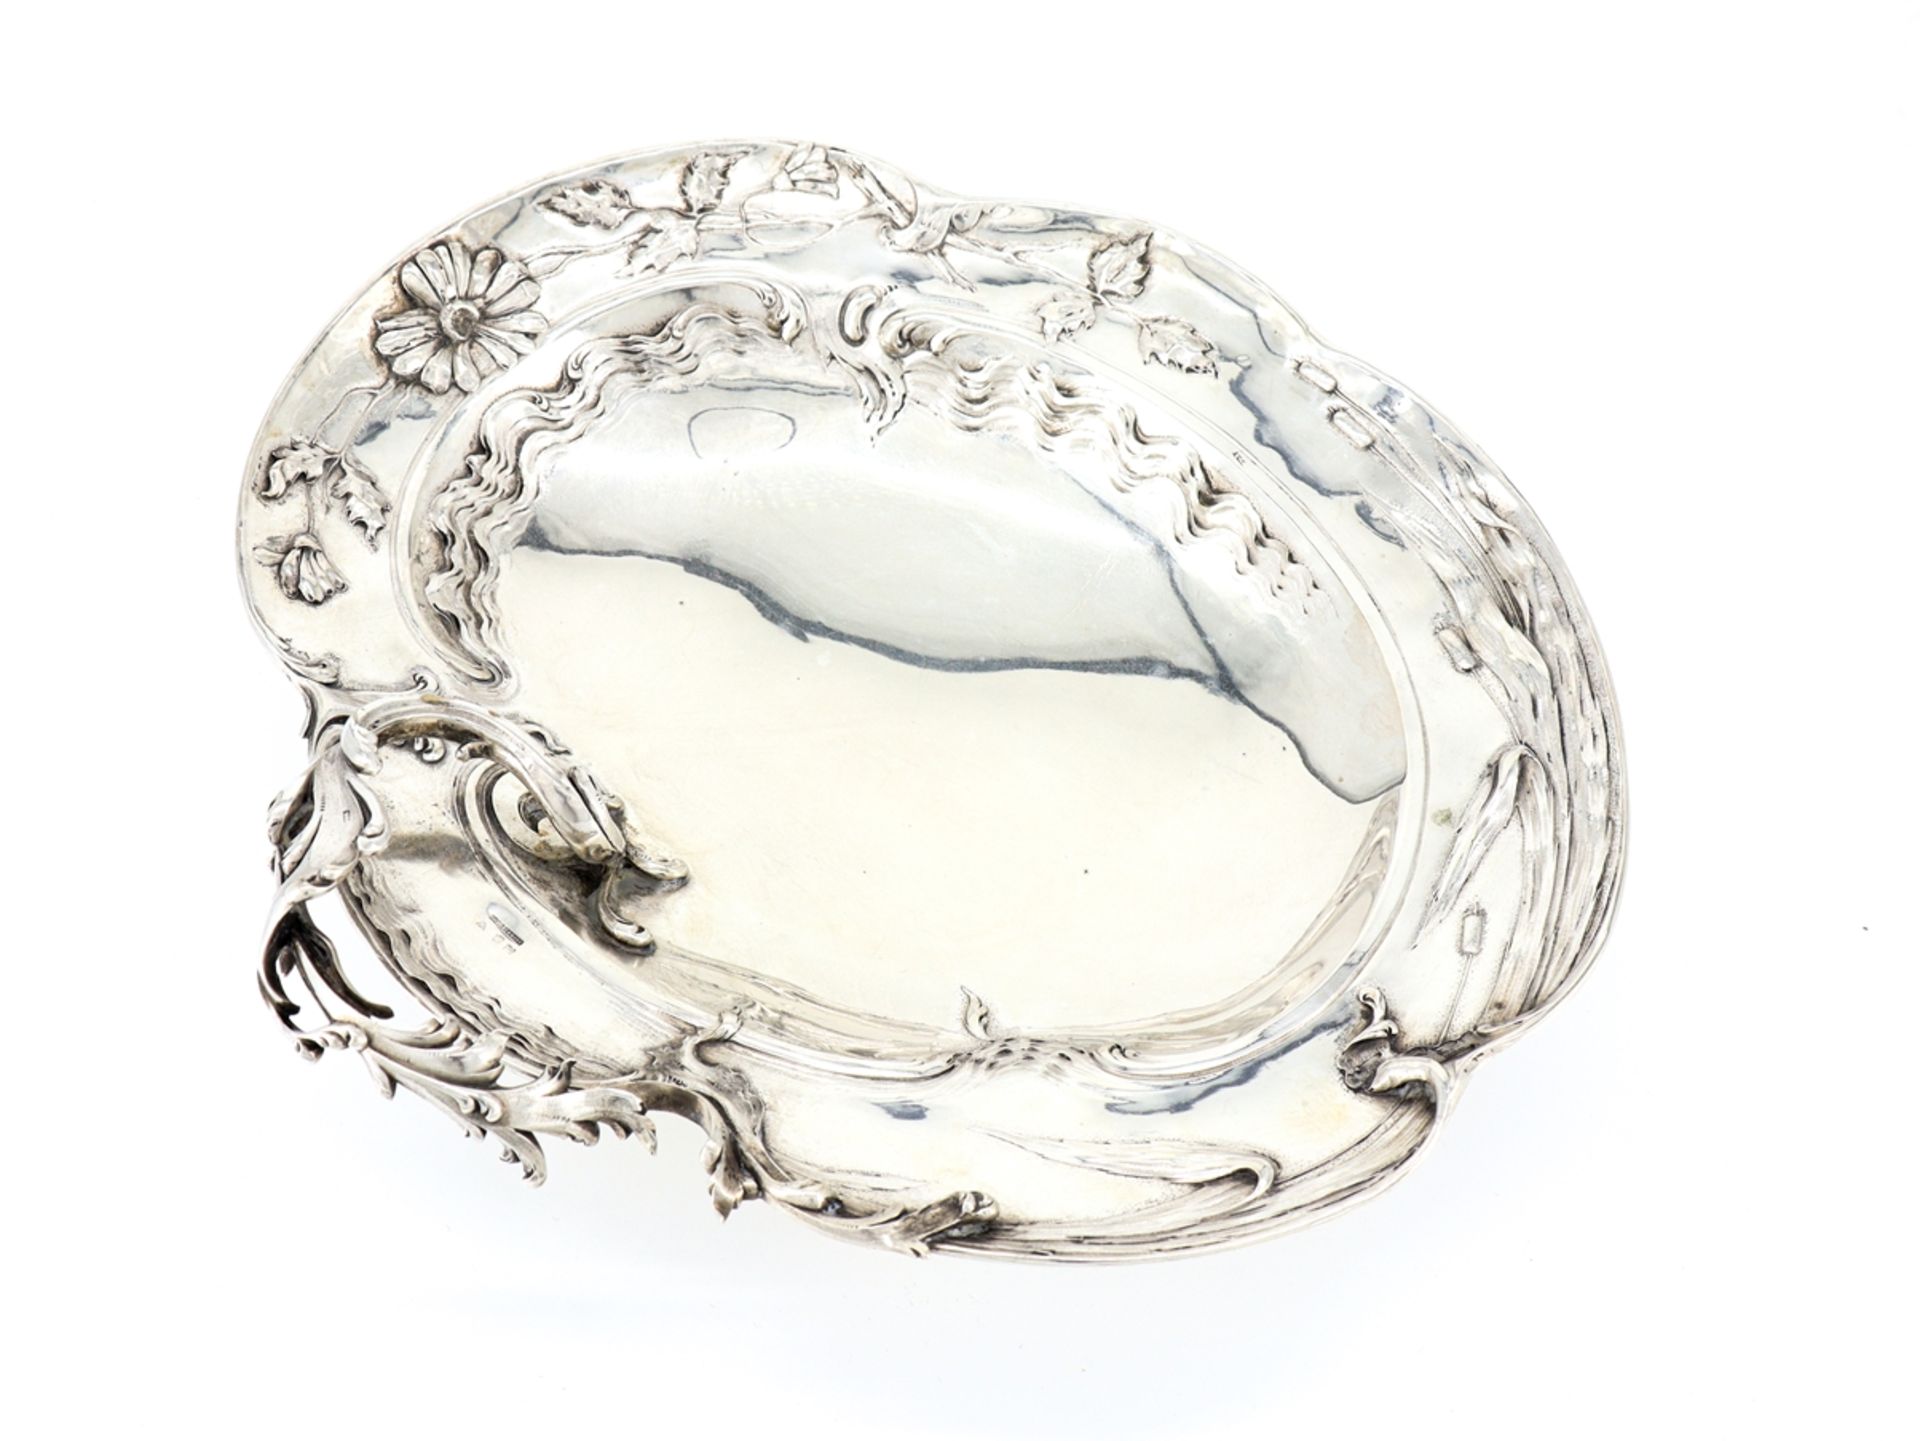 Large Art Nouveau bowl 800 silver, Wolfers Frères Brussels, circa 1900. - Image 4 of 7